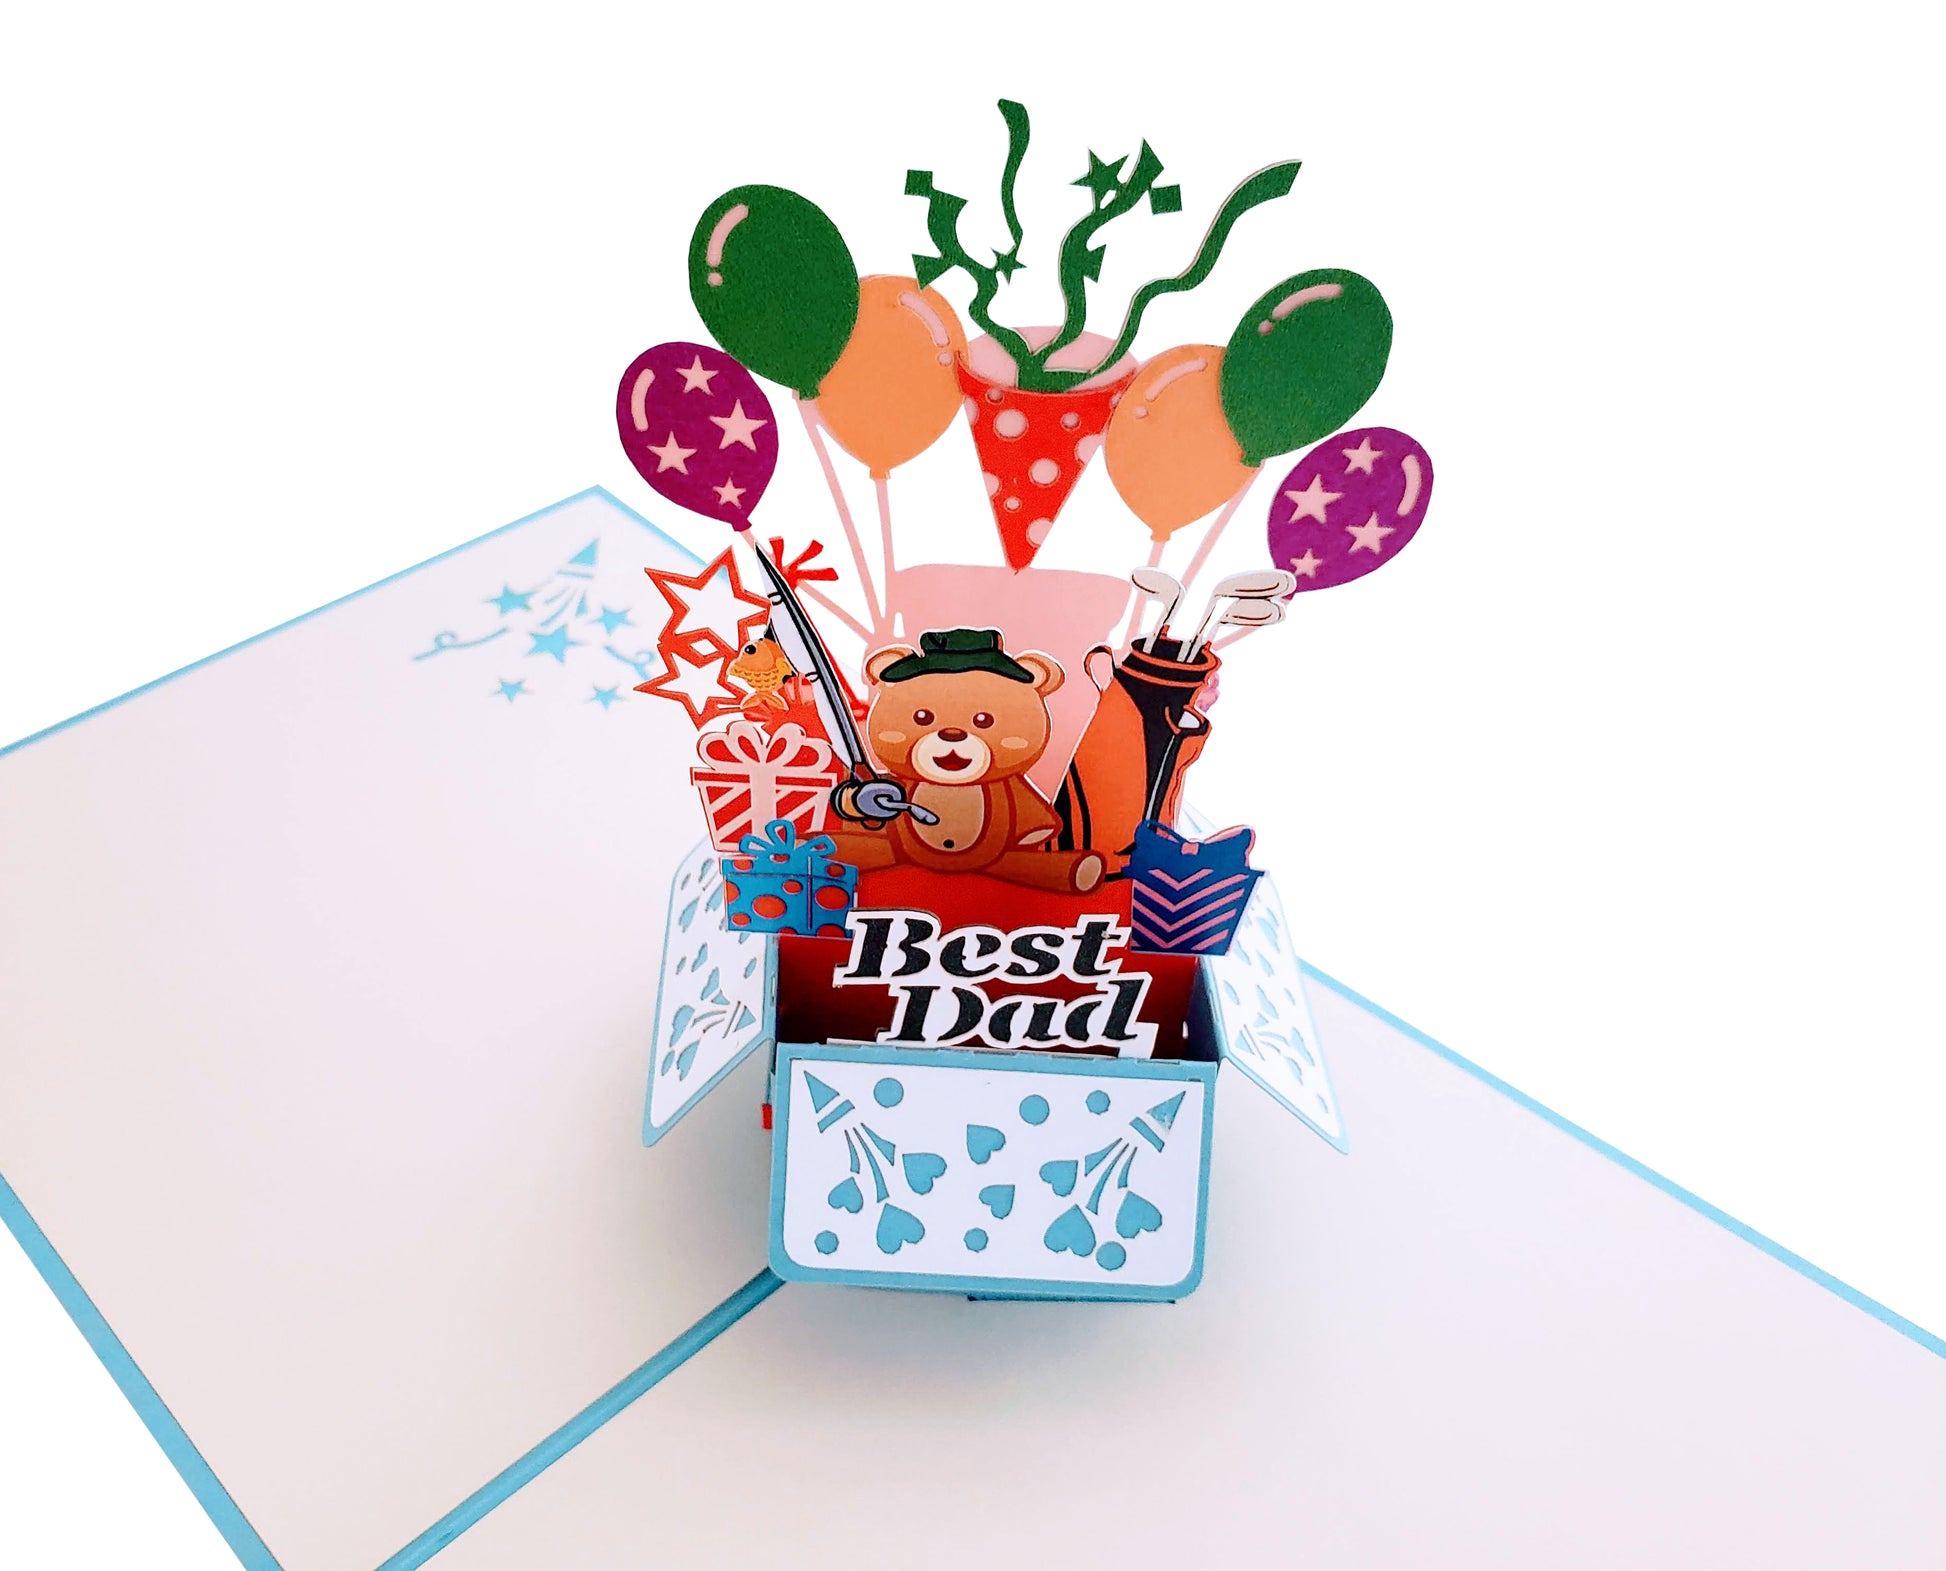 Best Dad Gift Box 3D Pop Up Greeting Card - best deal - Father's Day - Special Days - iGifts And Cards